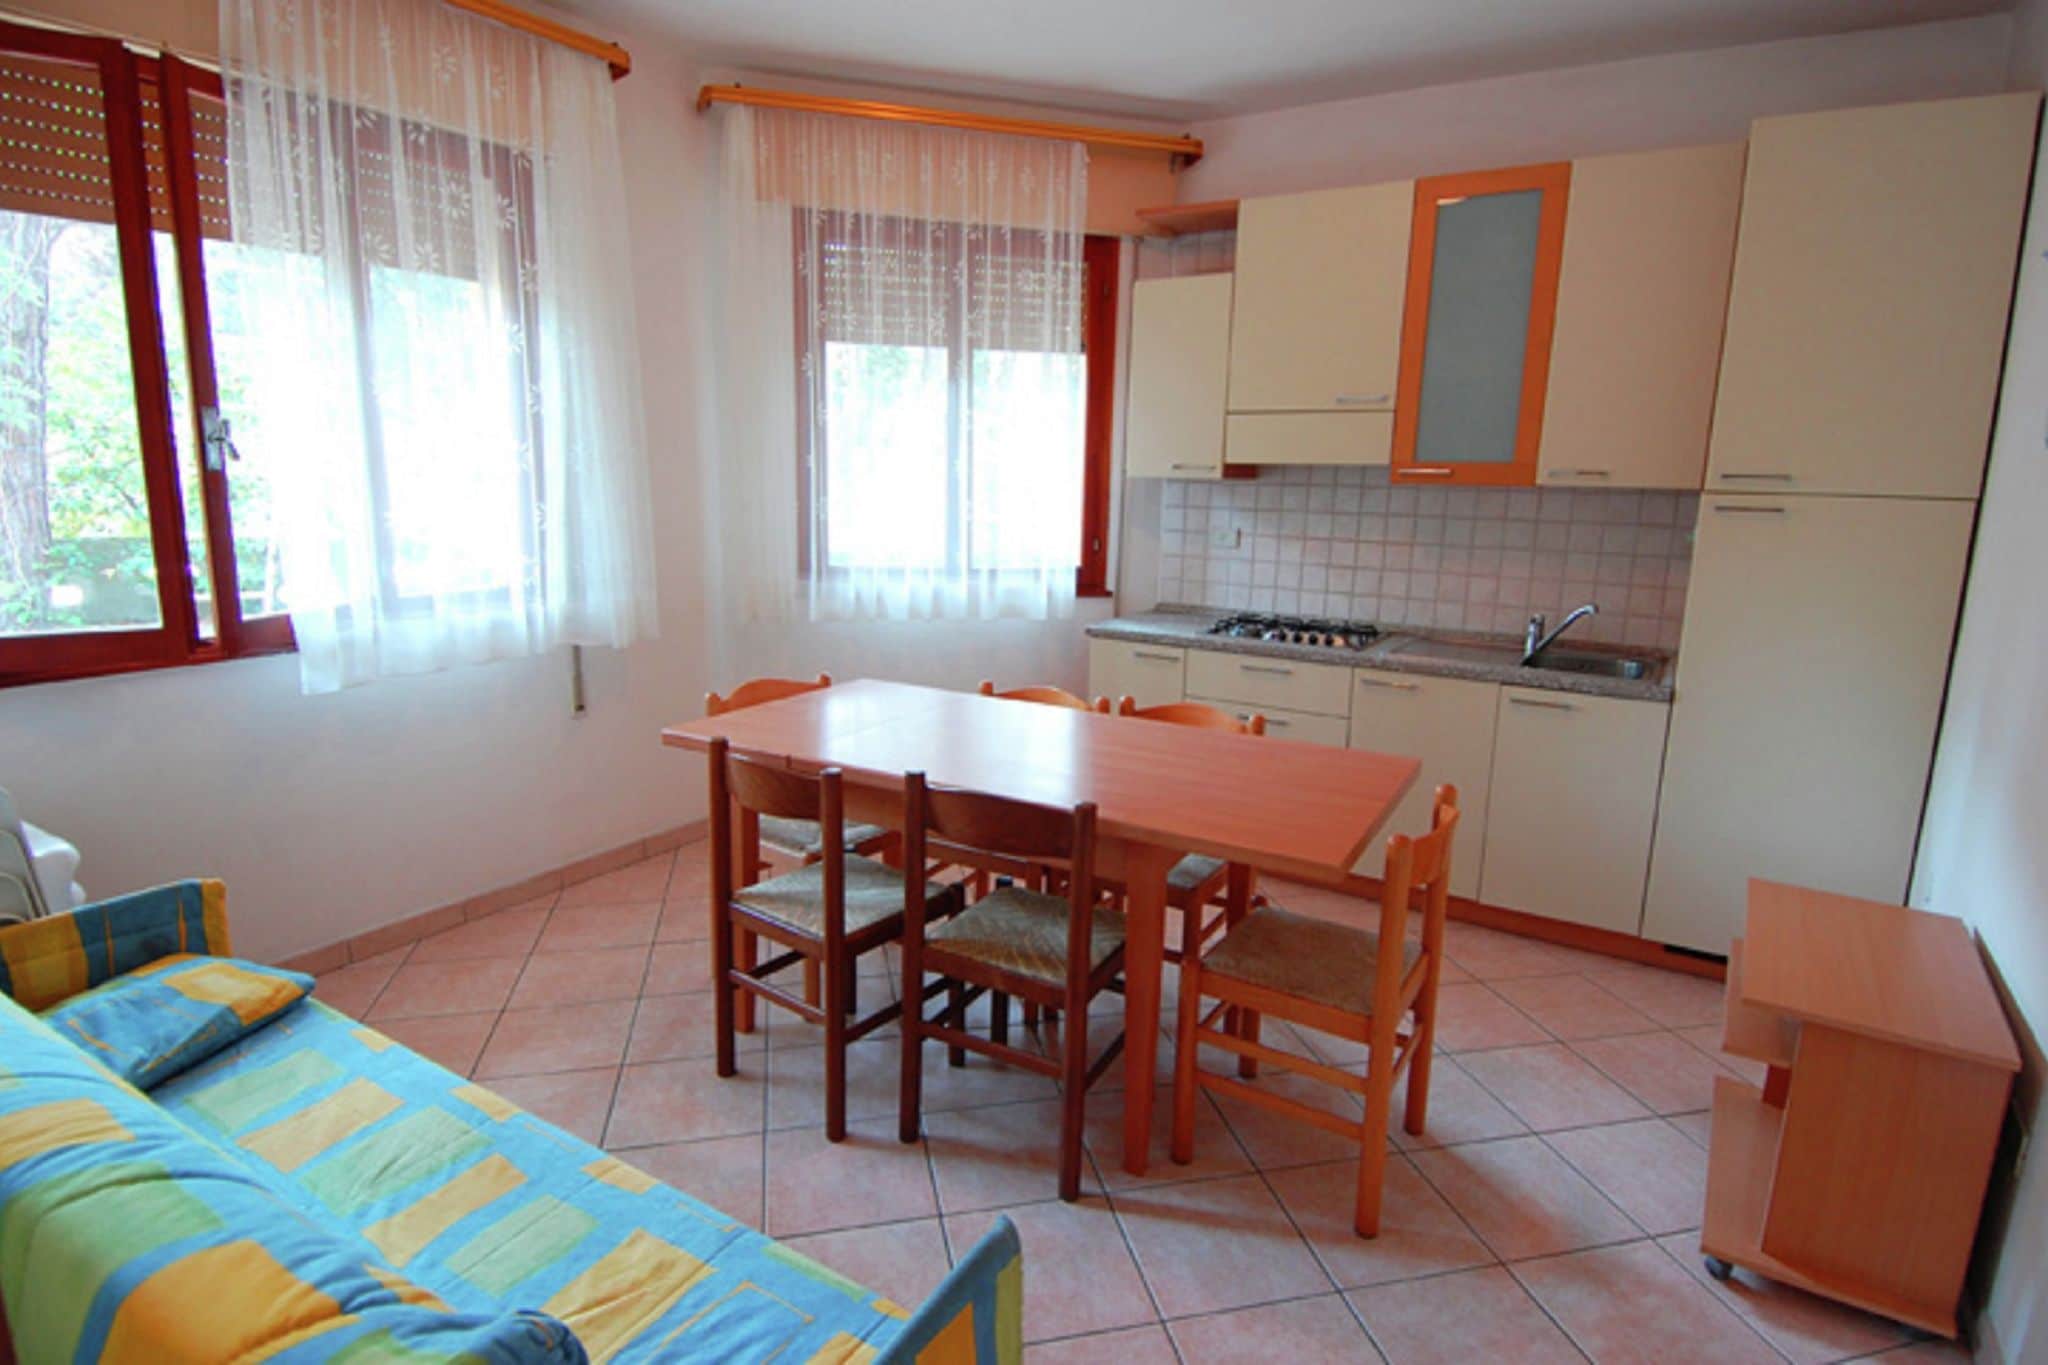 Comfortable holiday home apartment near Venice with parking